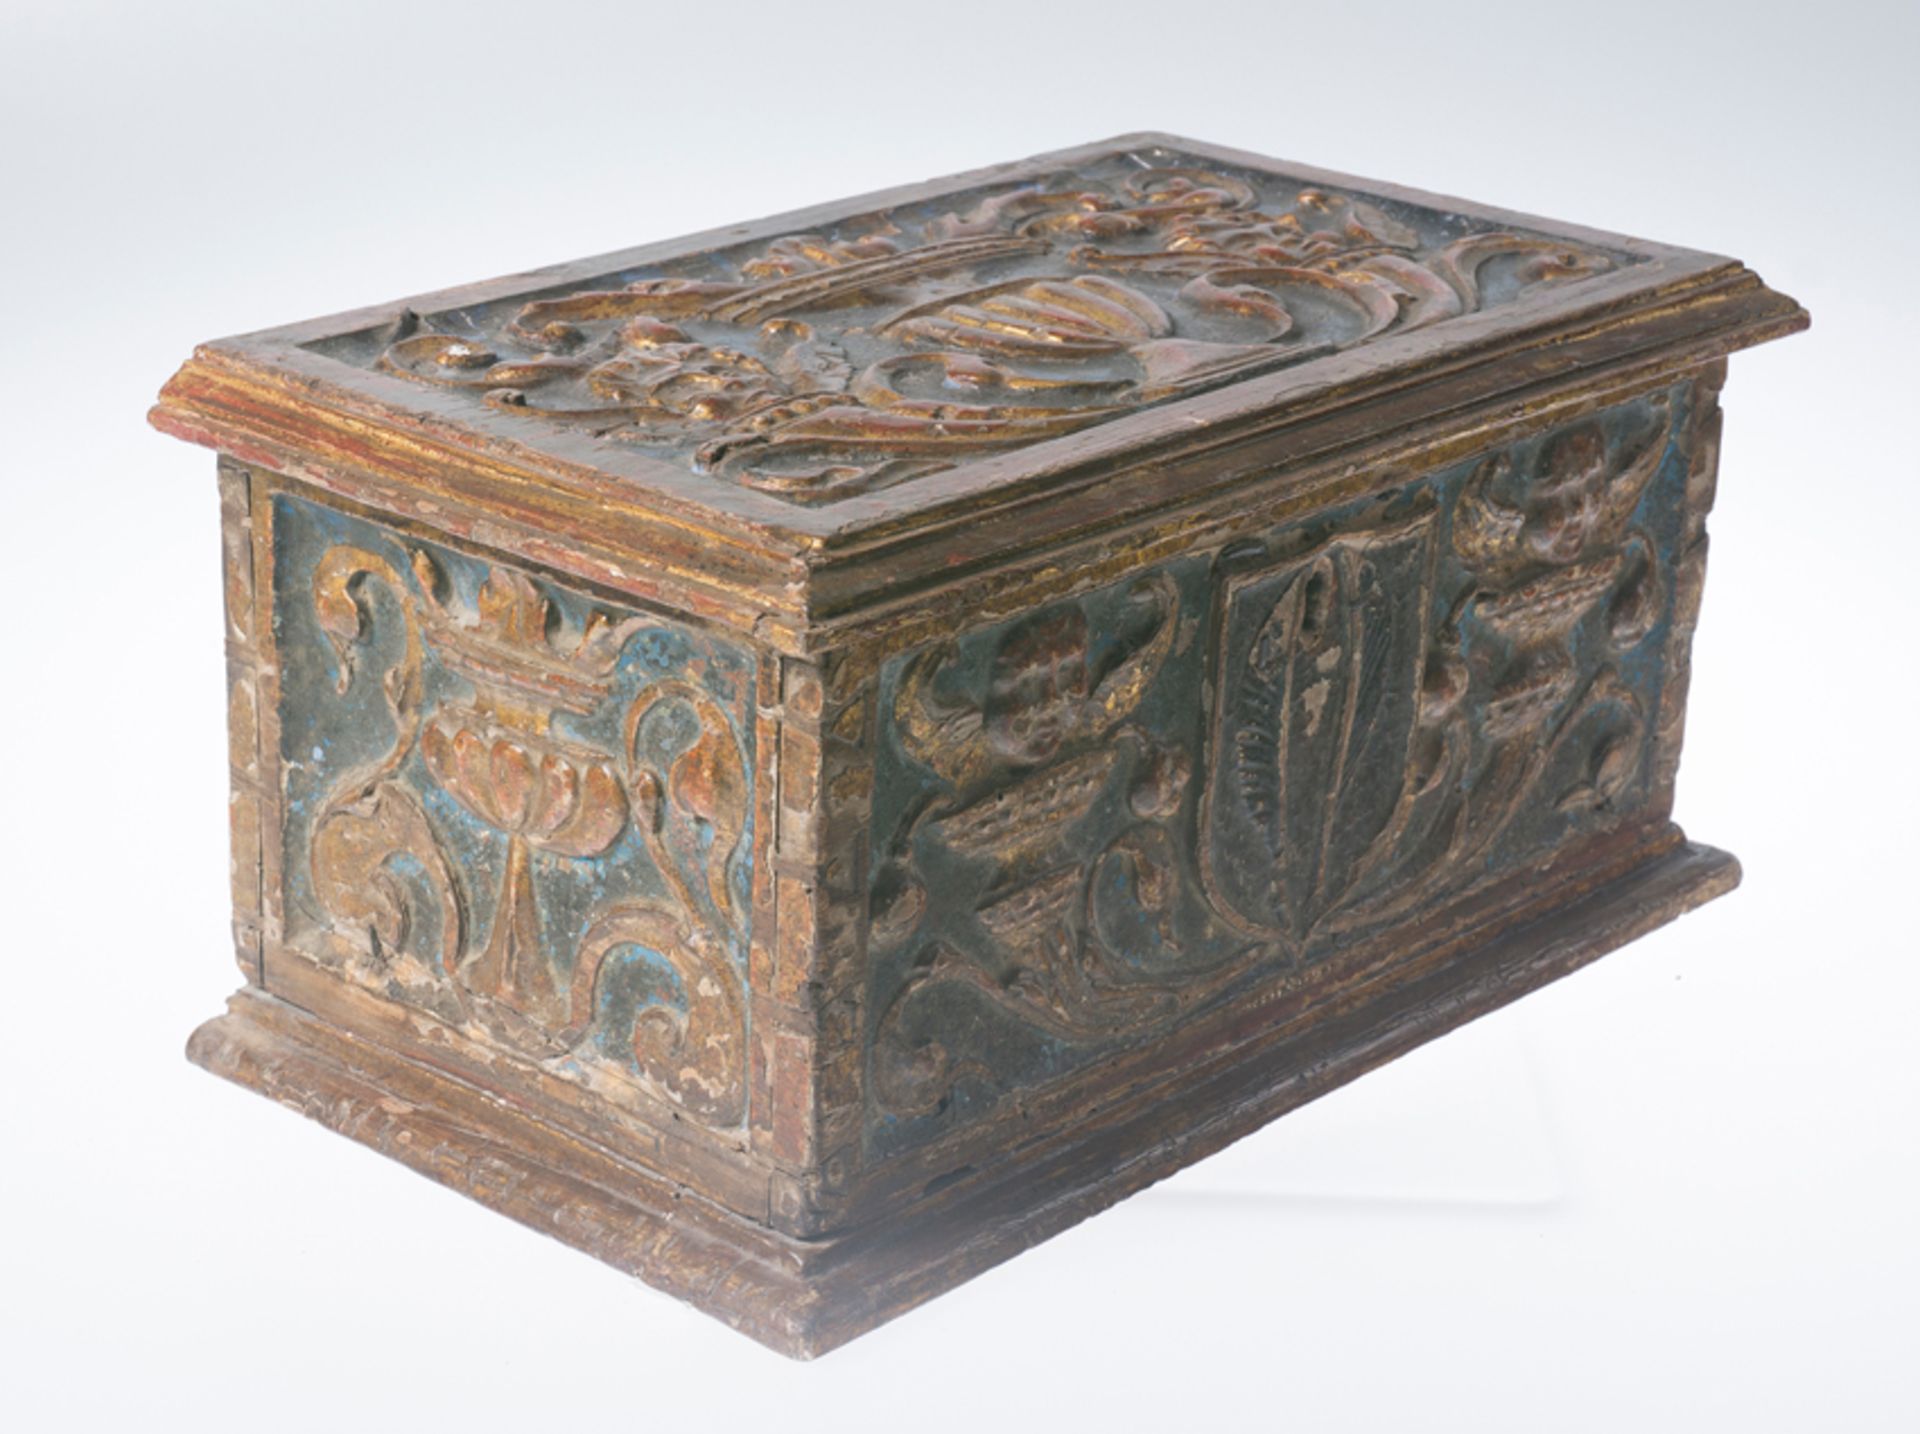 Carved, gilded and polychromed wooden chest. Aragon. 16th century. Circa 1525 - 1540. - Bild 6 aus 8